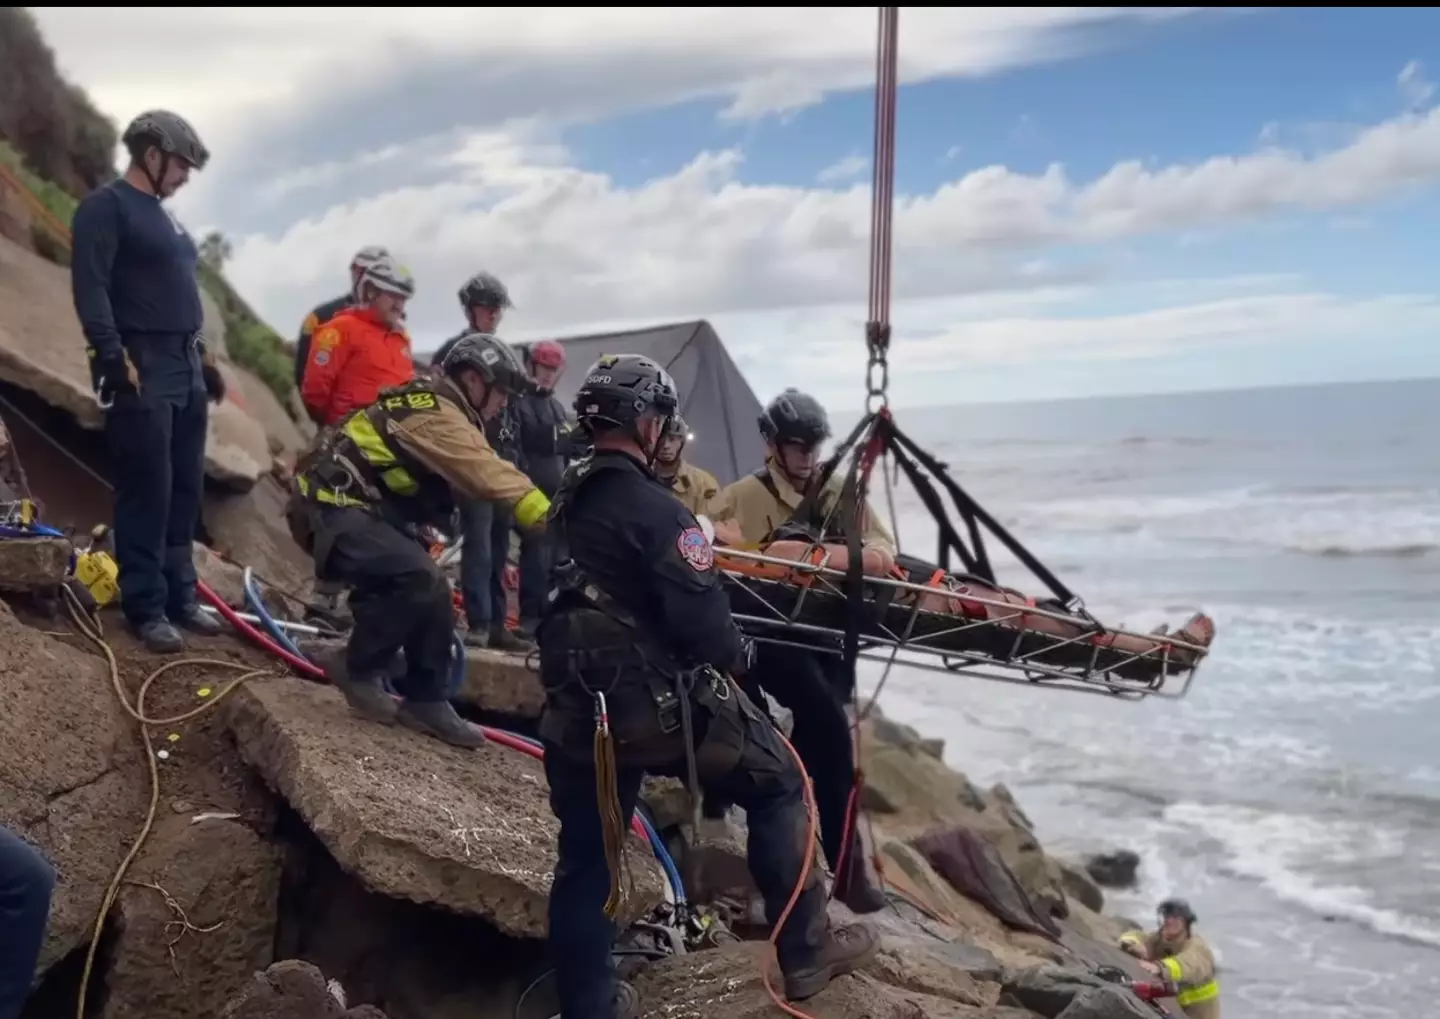 Rescue teams assessed the situation and concluded the man was pinned from the waist down.